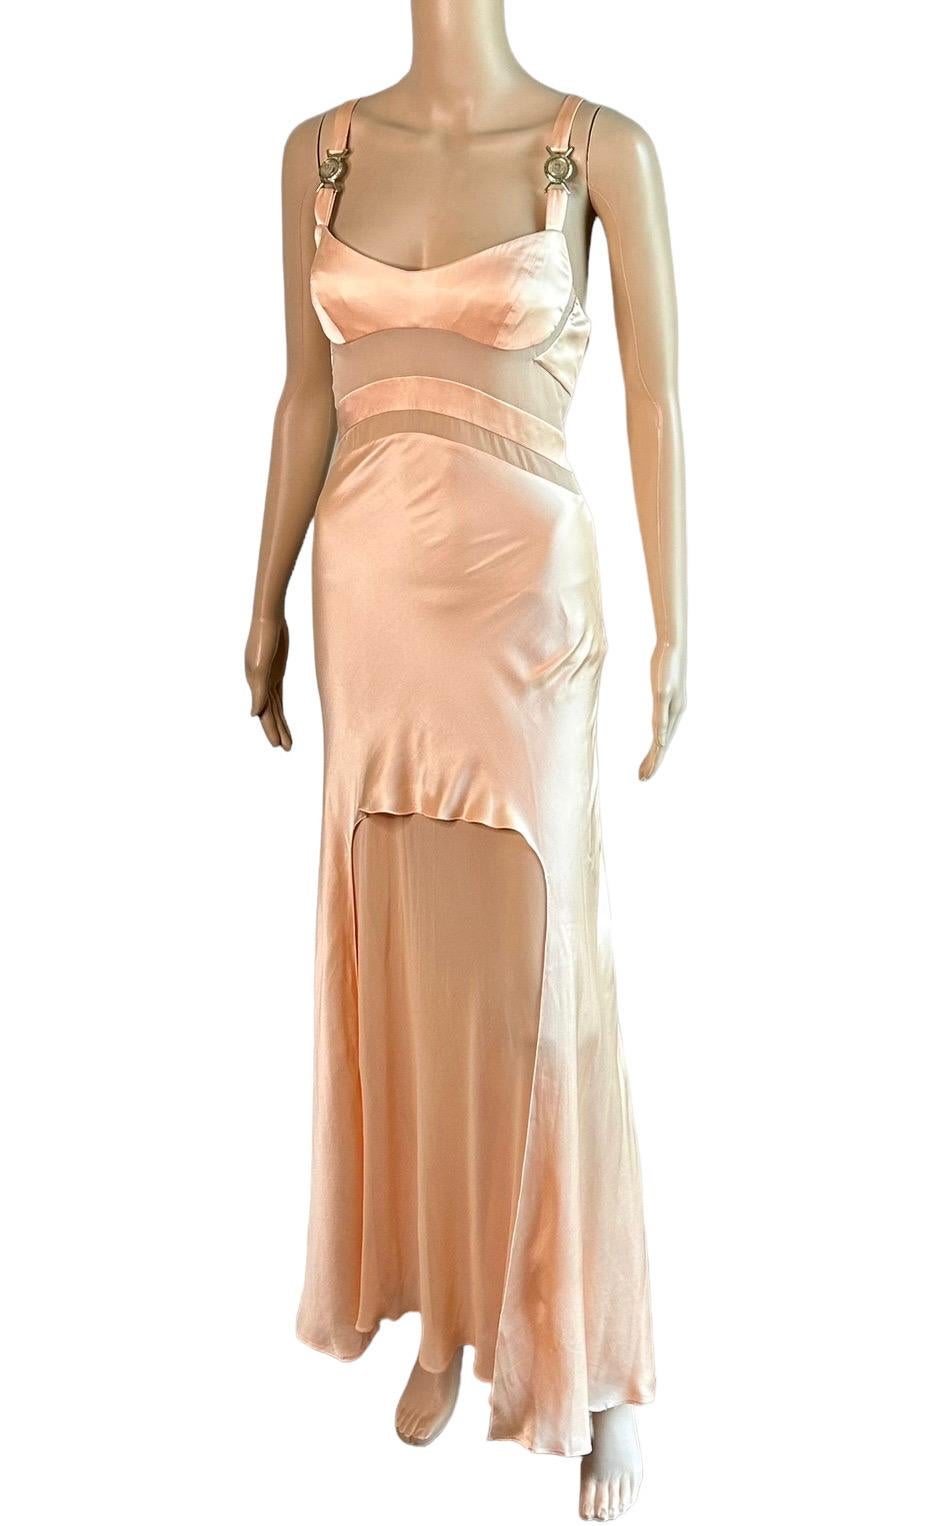 Versace S/S 2005 Runway Sheer Panels Medusa Logo Silk Slip Evening Dress Gown

Look 48 from the Spring 2005 Collection.

Please note: Size tag is missing, based on fit it will fit size S.

Straps have been adjusted but can easily be readjusted by a